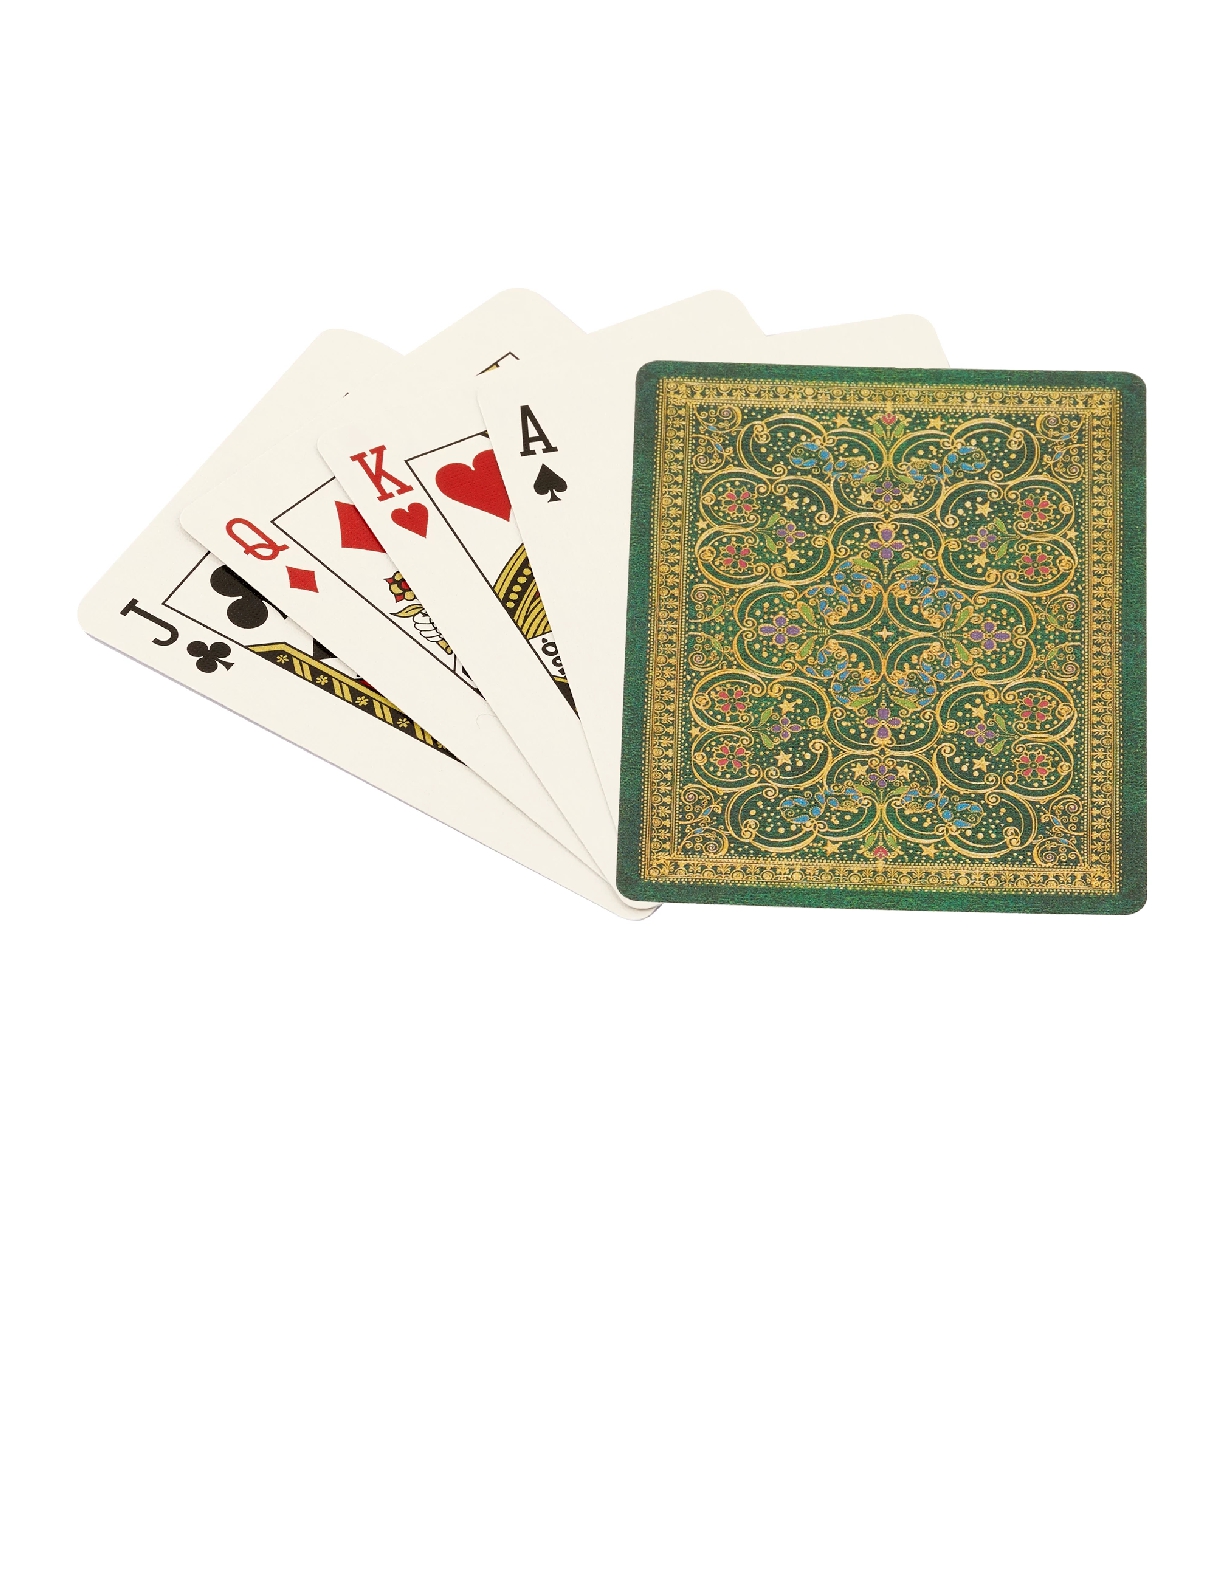 Pinnacle, The Queen's Binding, Playing Cards, Standard Deck